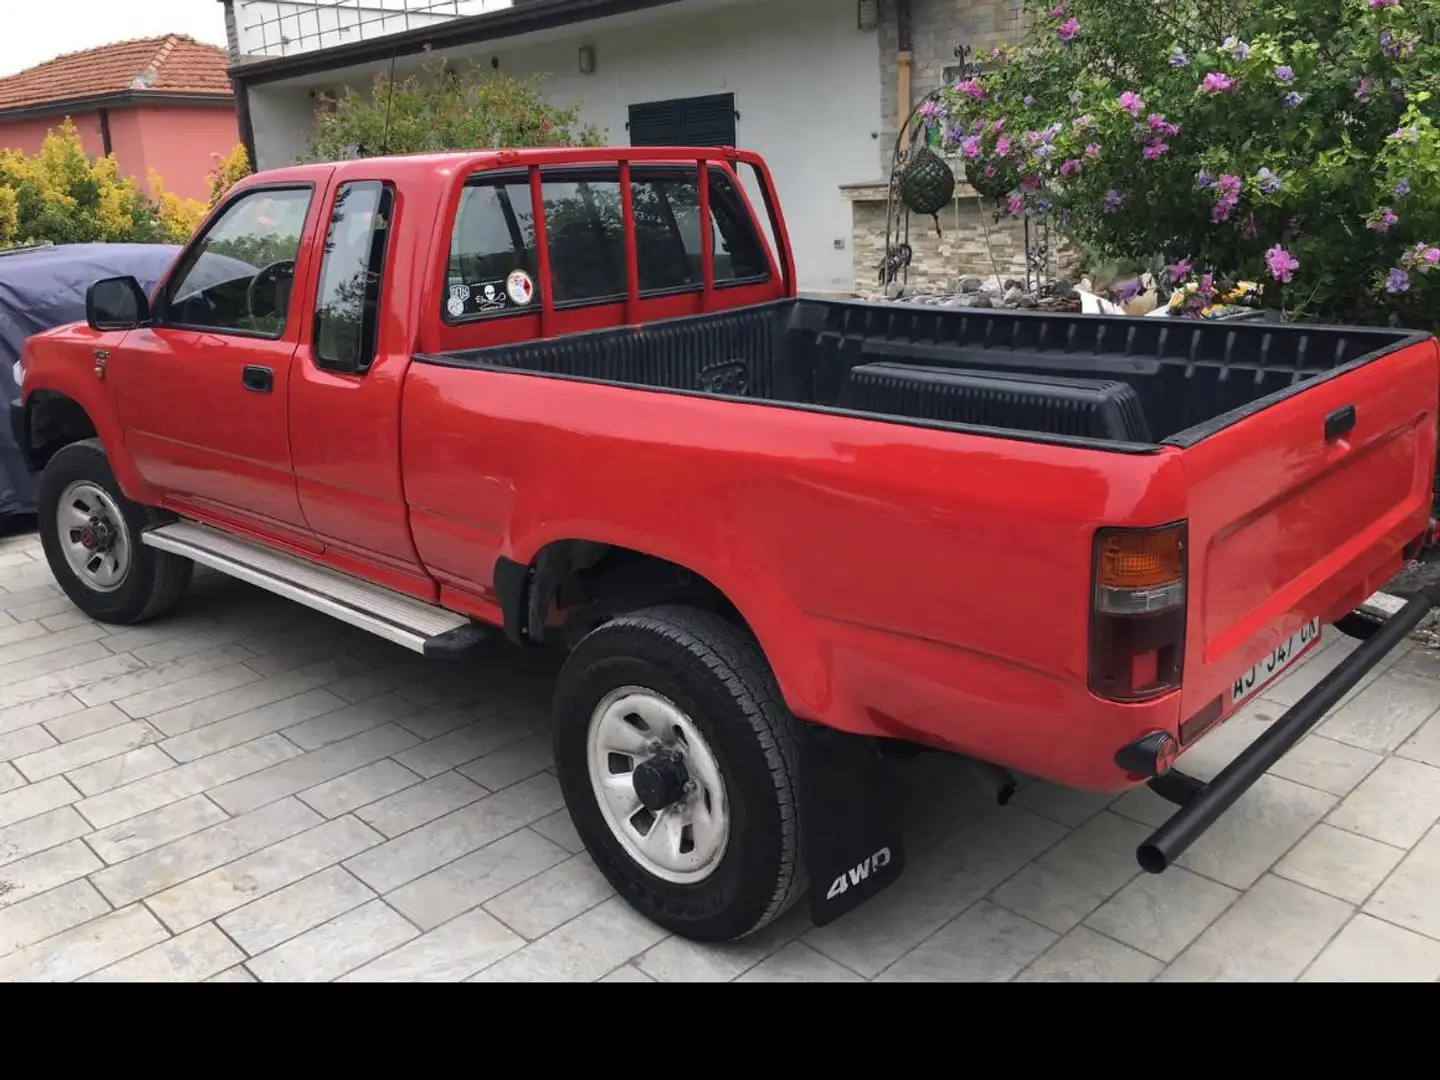 Toyota Hilux Hilux 2.5 extra cab - 2